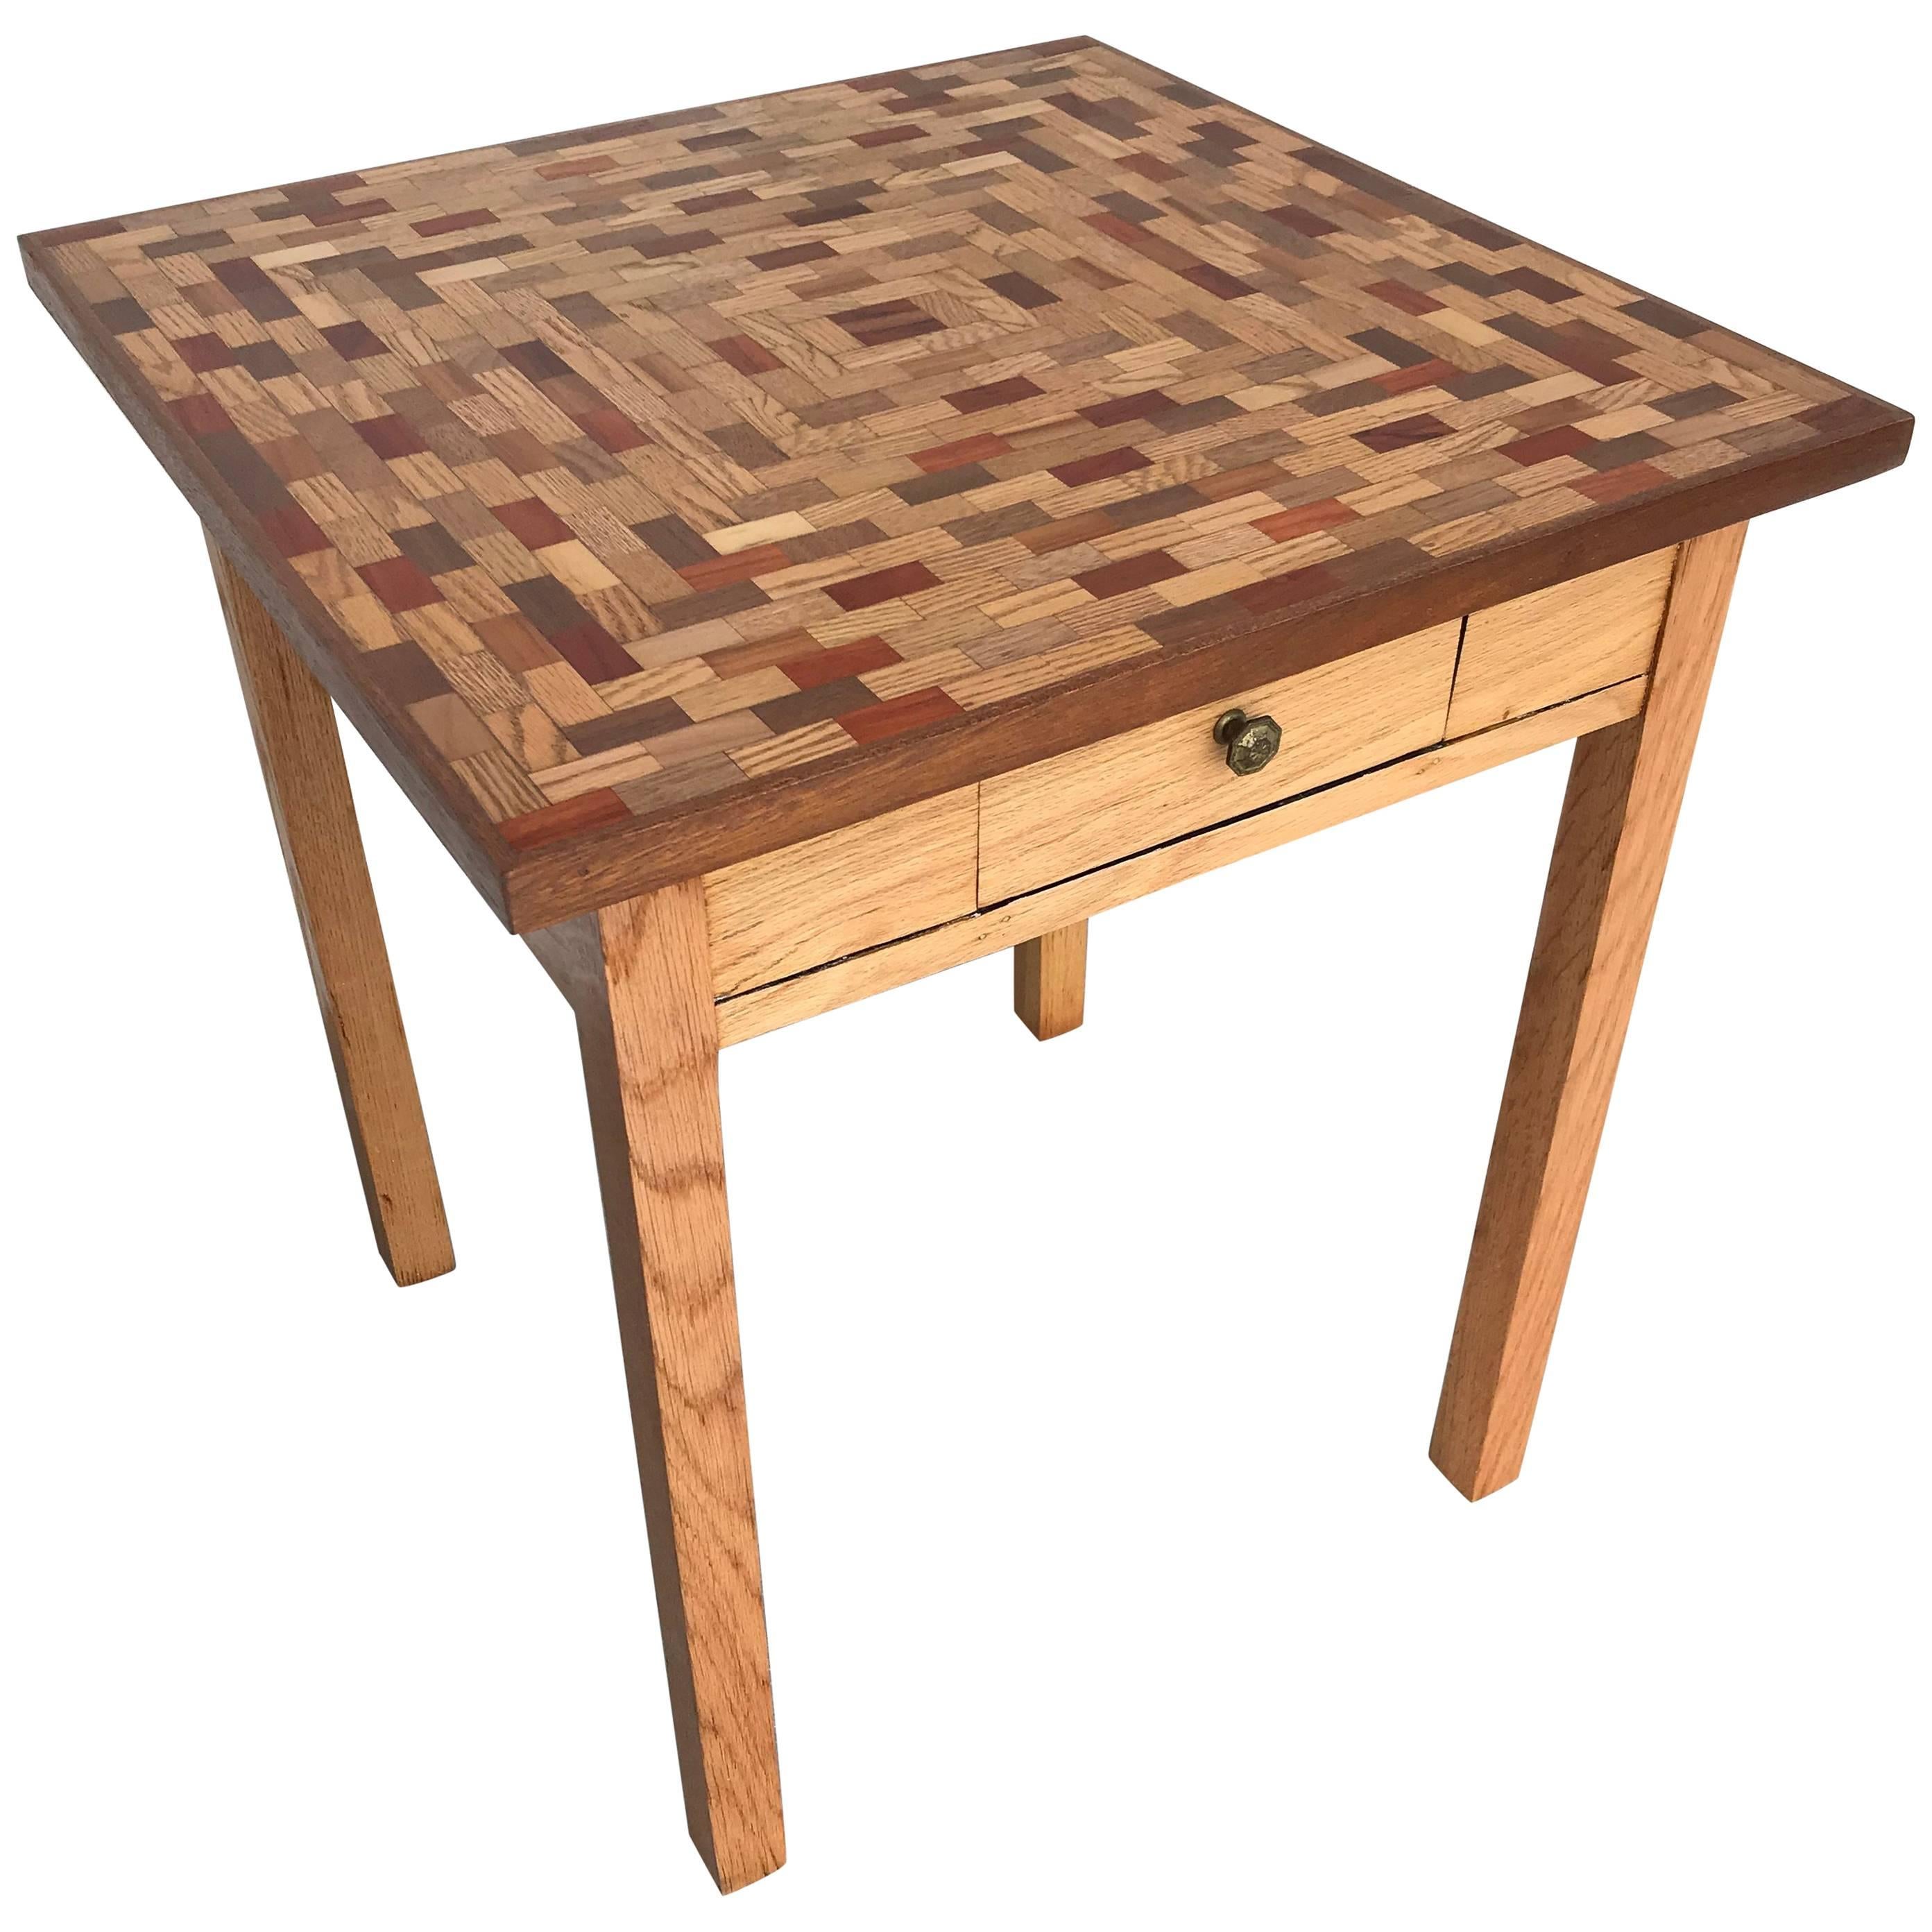 Little Parquet Top Game or Dining Table